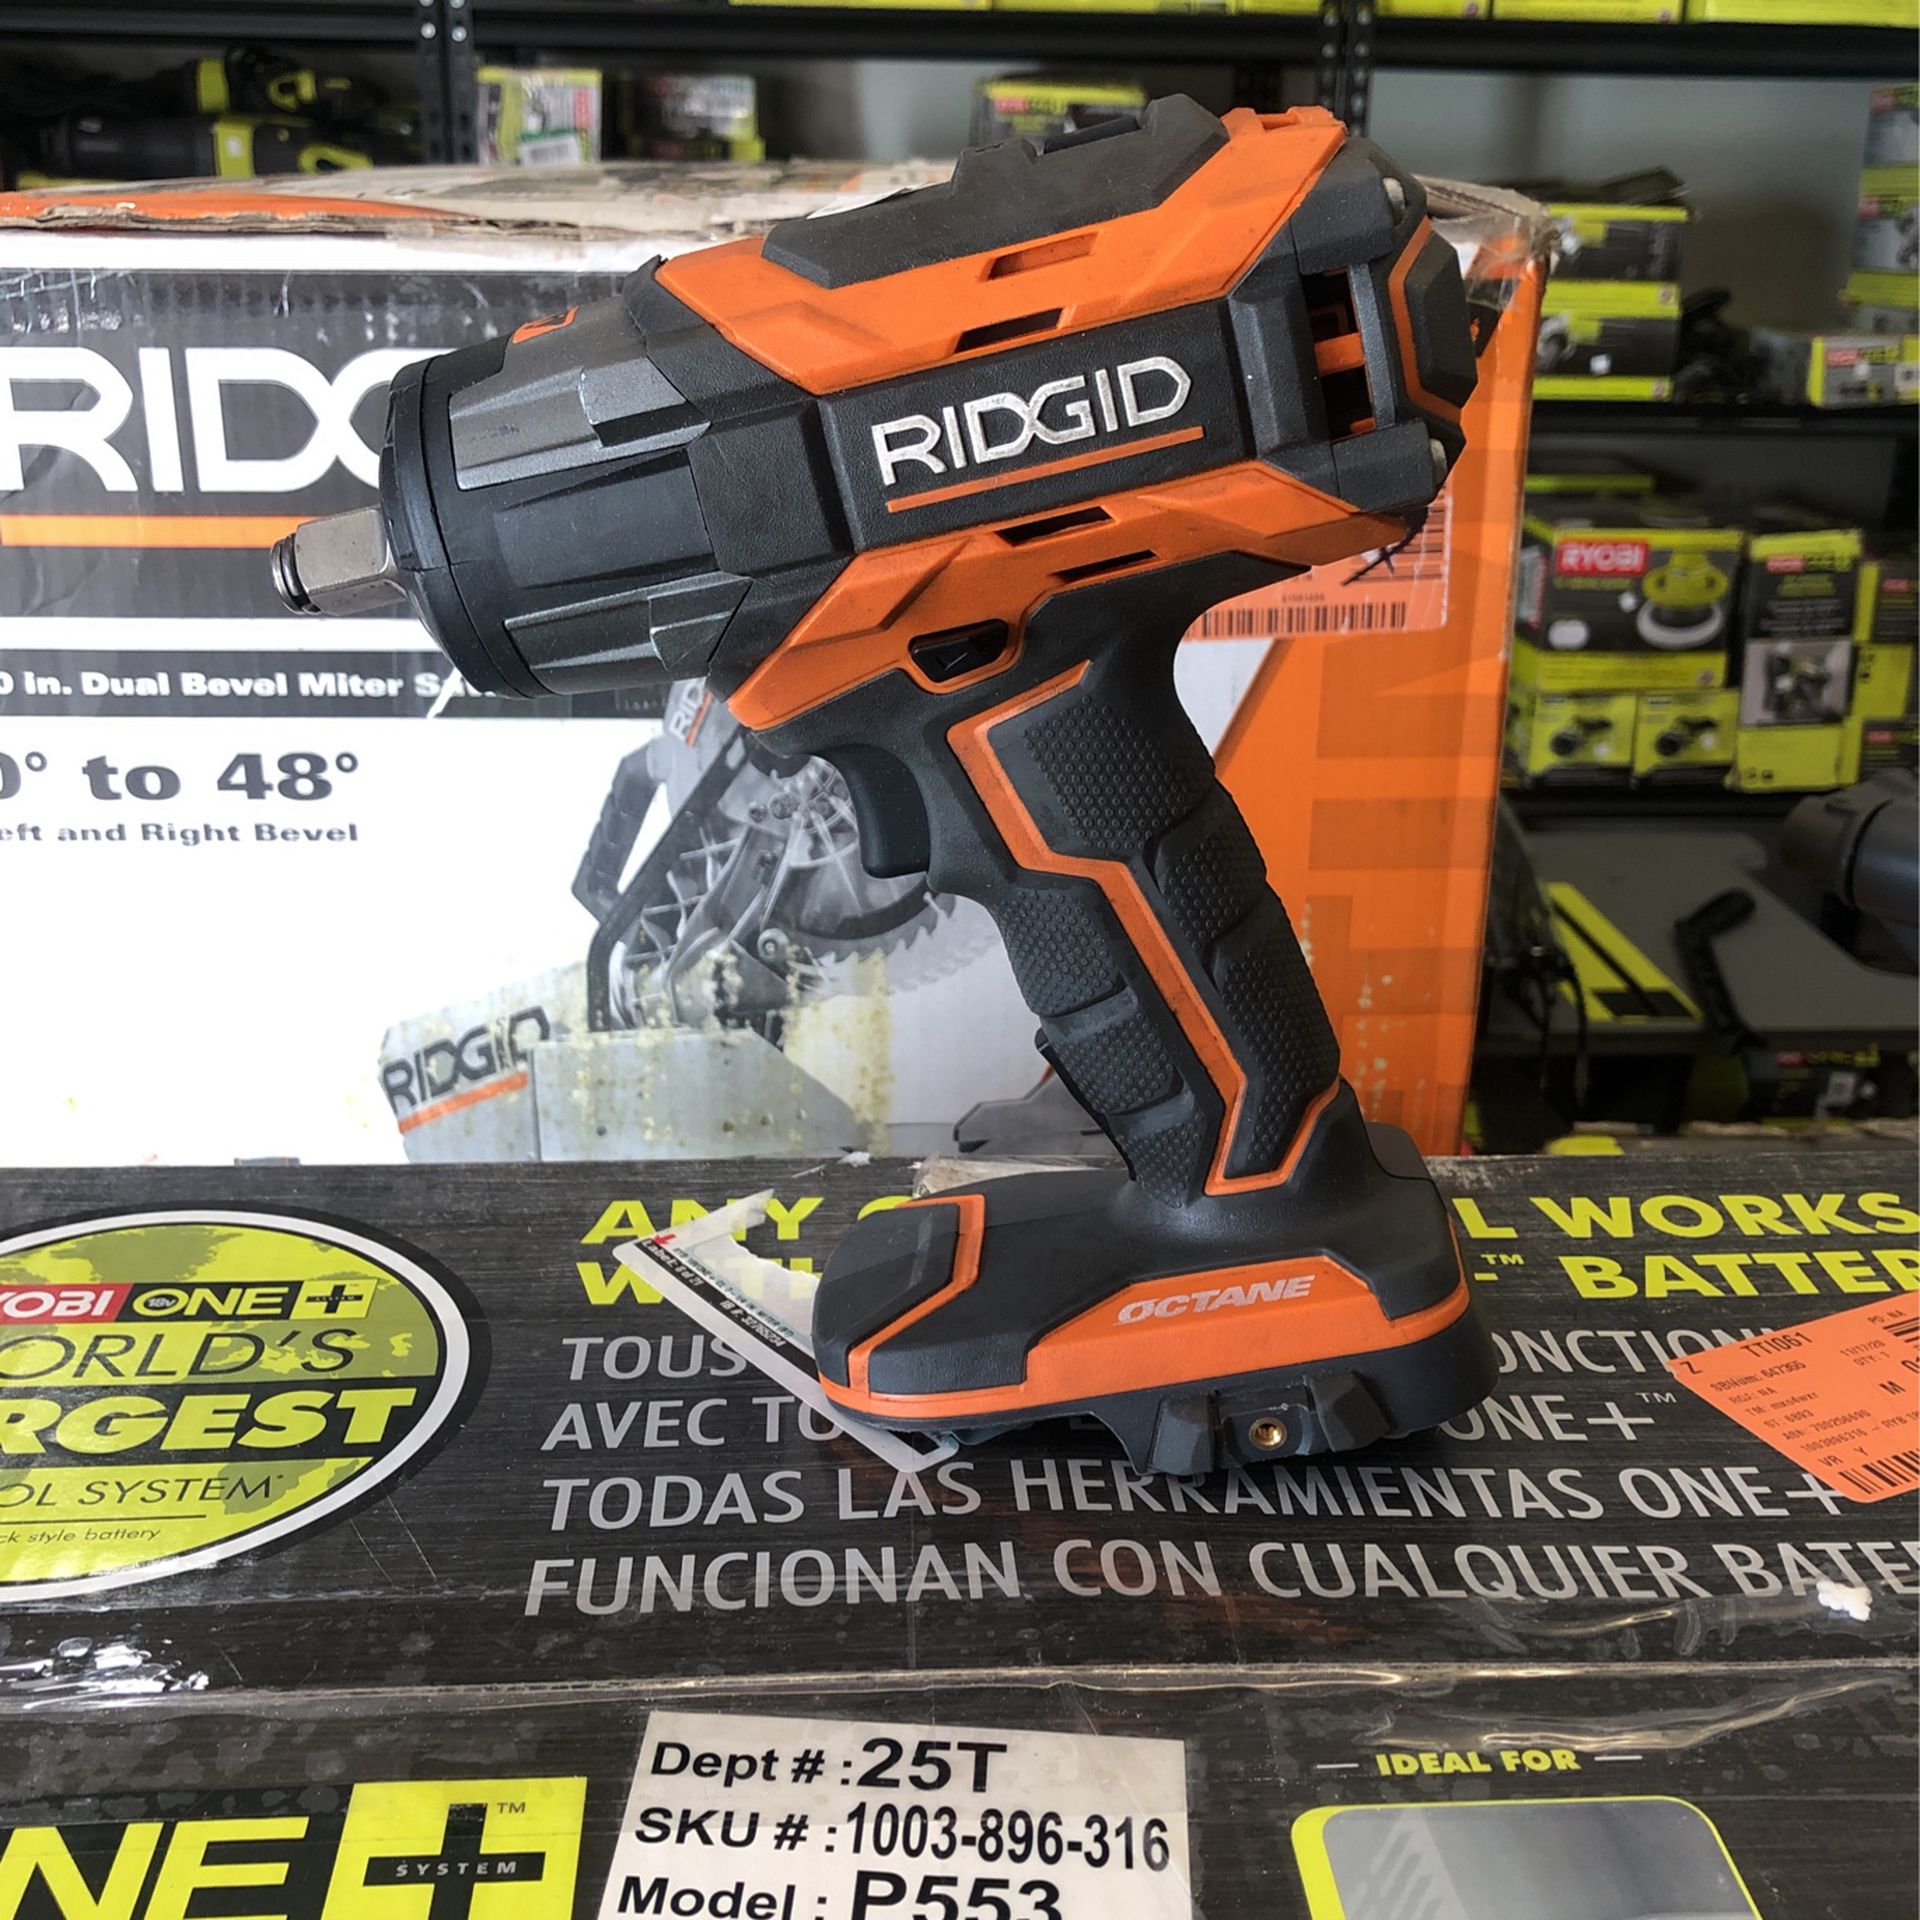 Like New Ridgid 1/2” Impact Wrench Driver With Battery And Charger $180